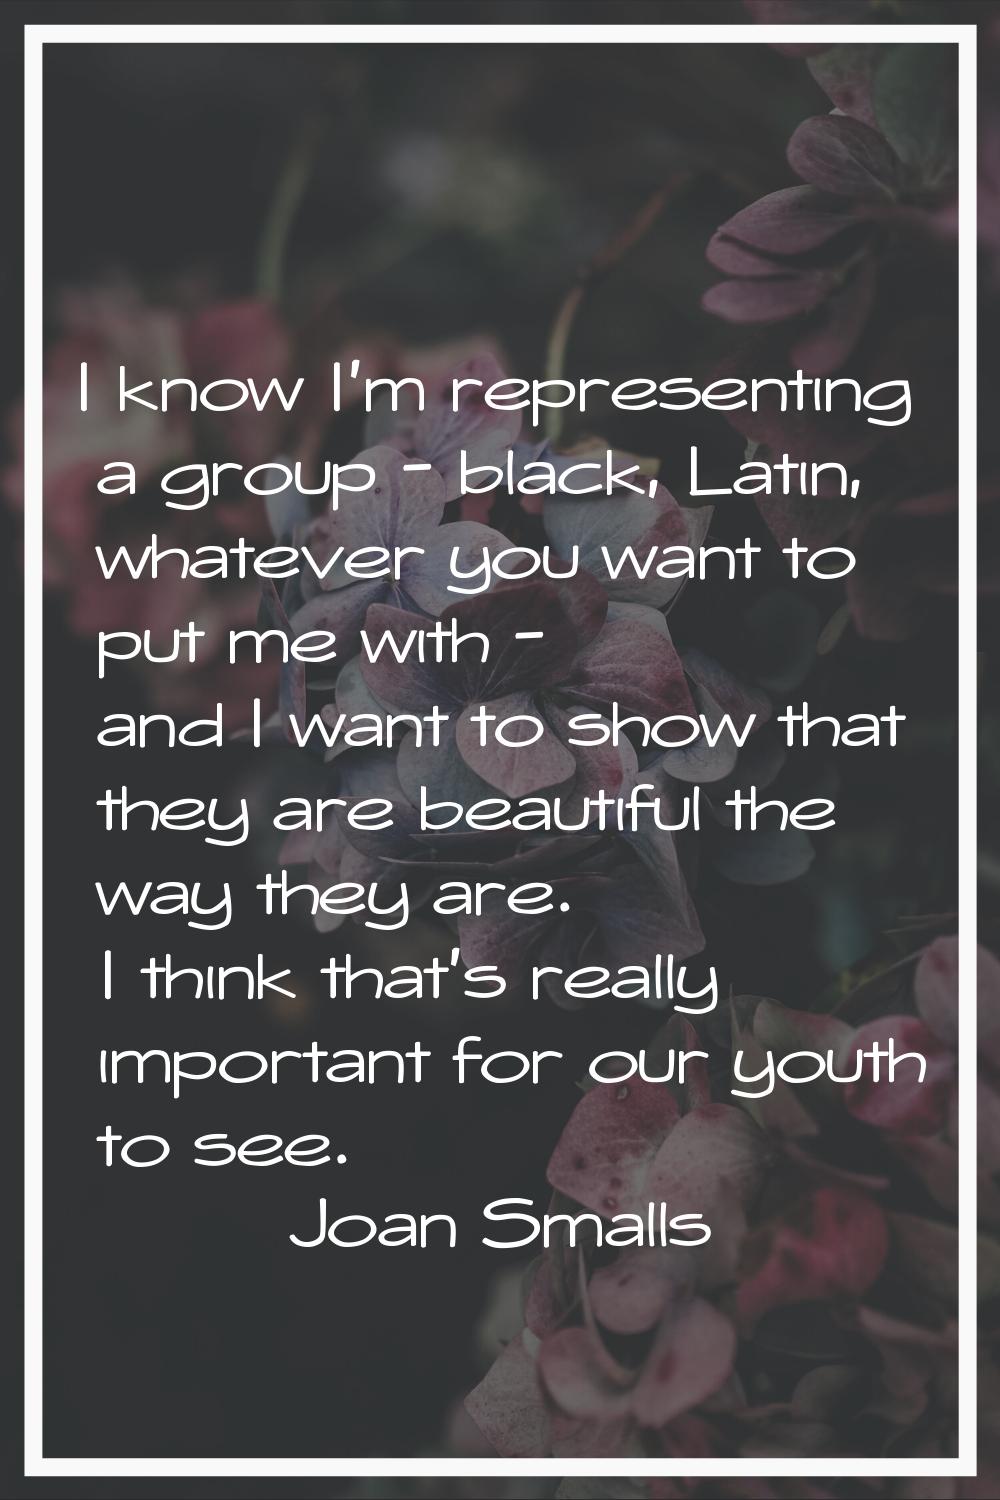 I know I'm representing a group - black, Latin, whatever you want to put me with - and I want to sh